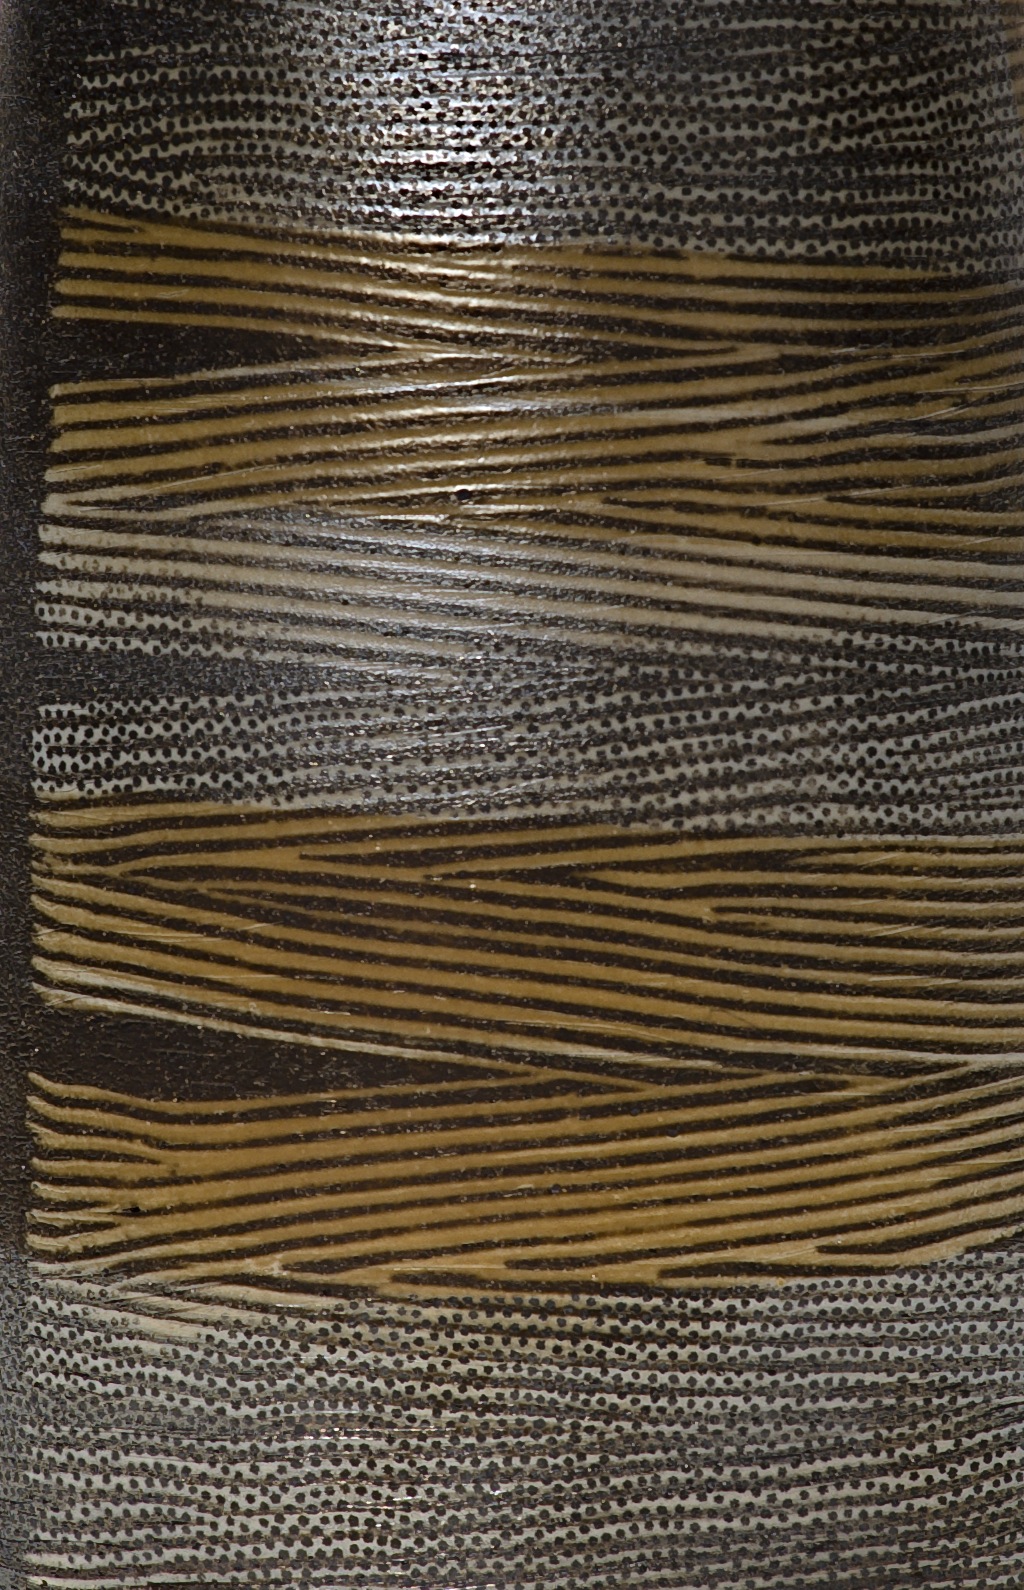  detail of inlaid slip surface with dot overlay 